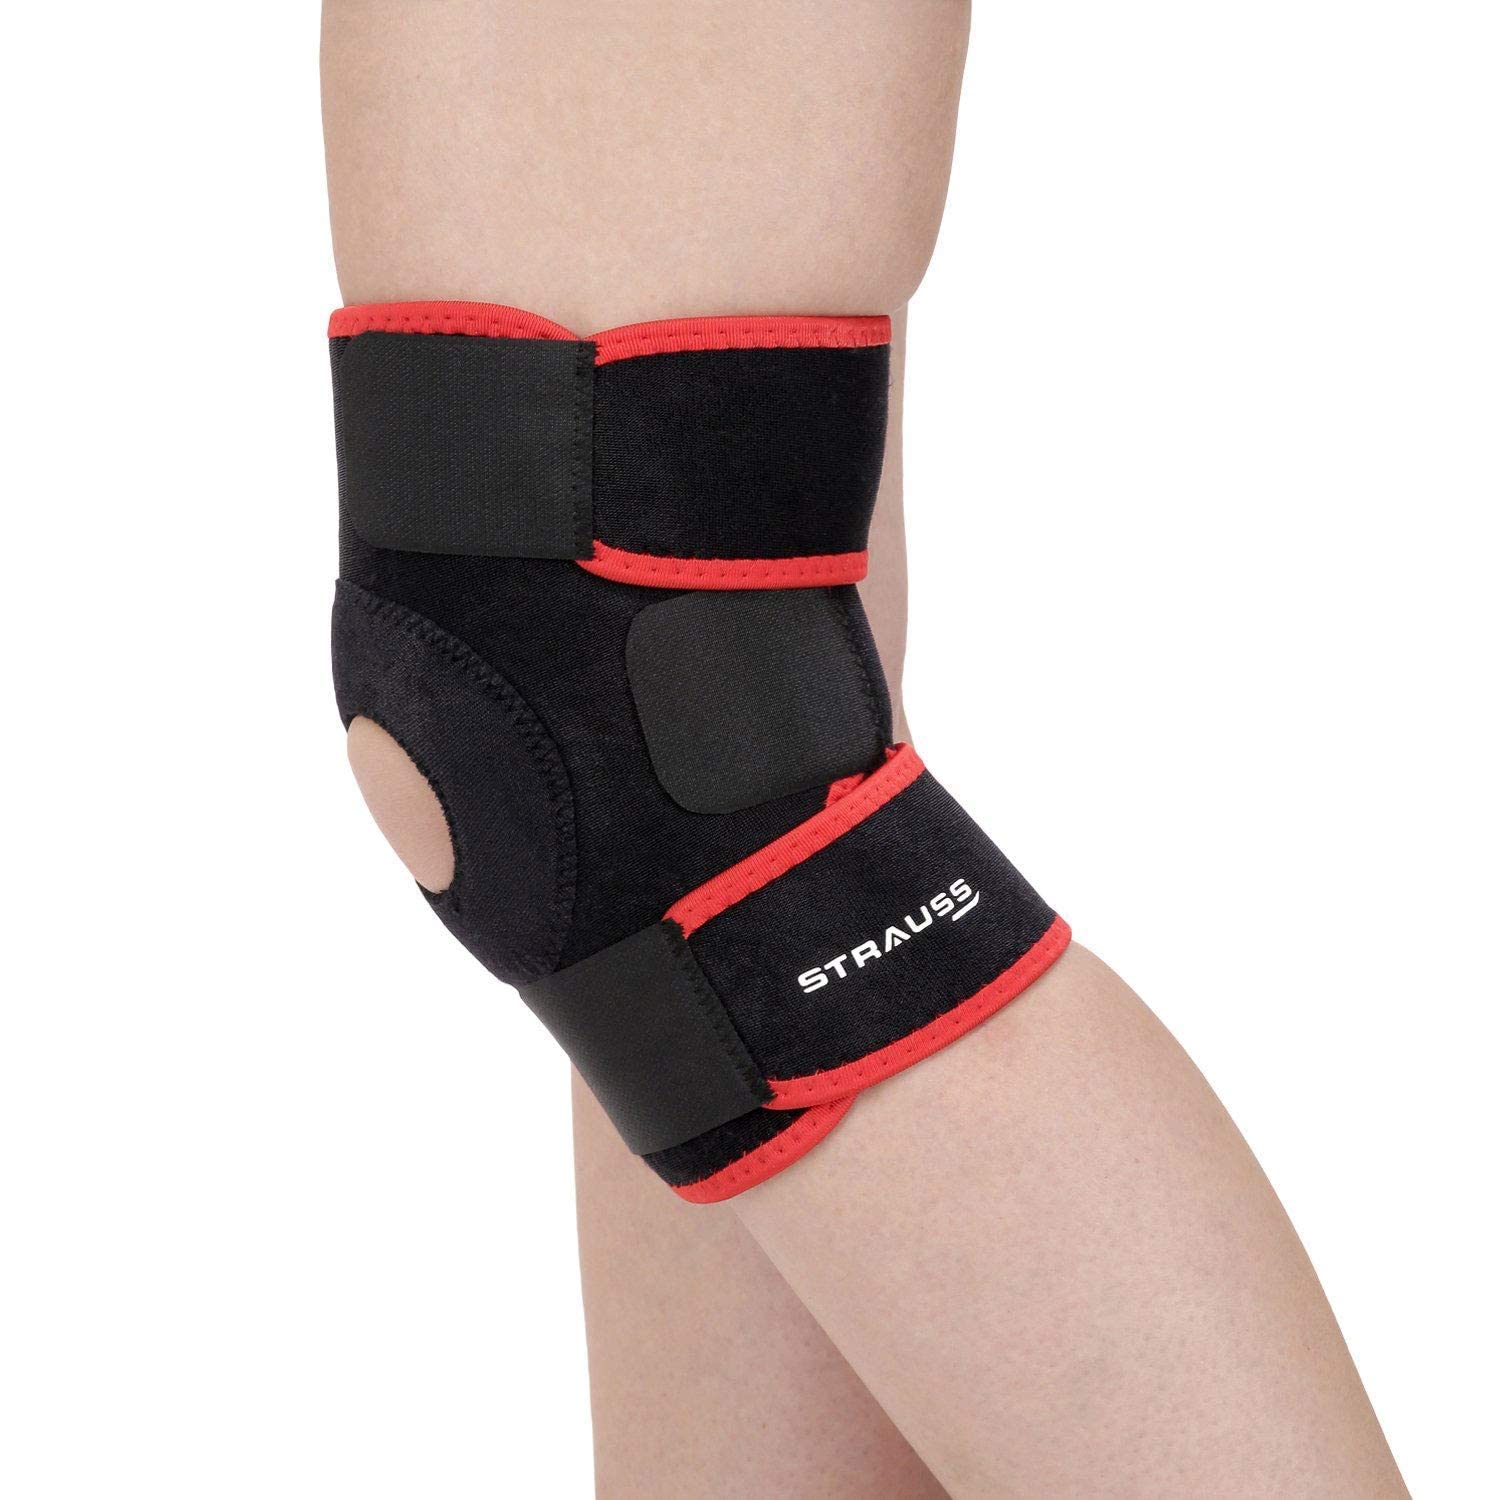 STRAUSS Adjustable Knee Support Patella|knee support for men and